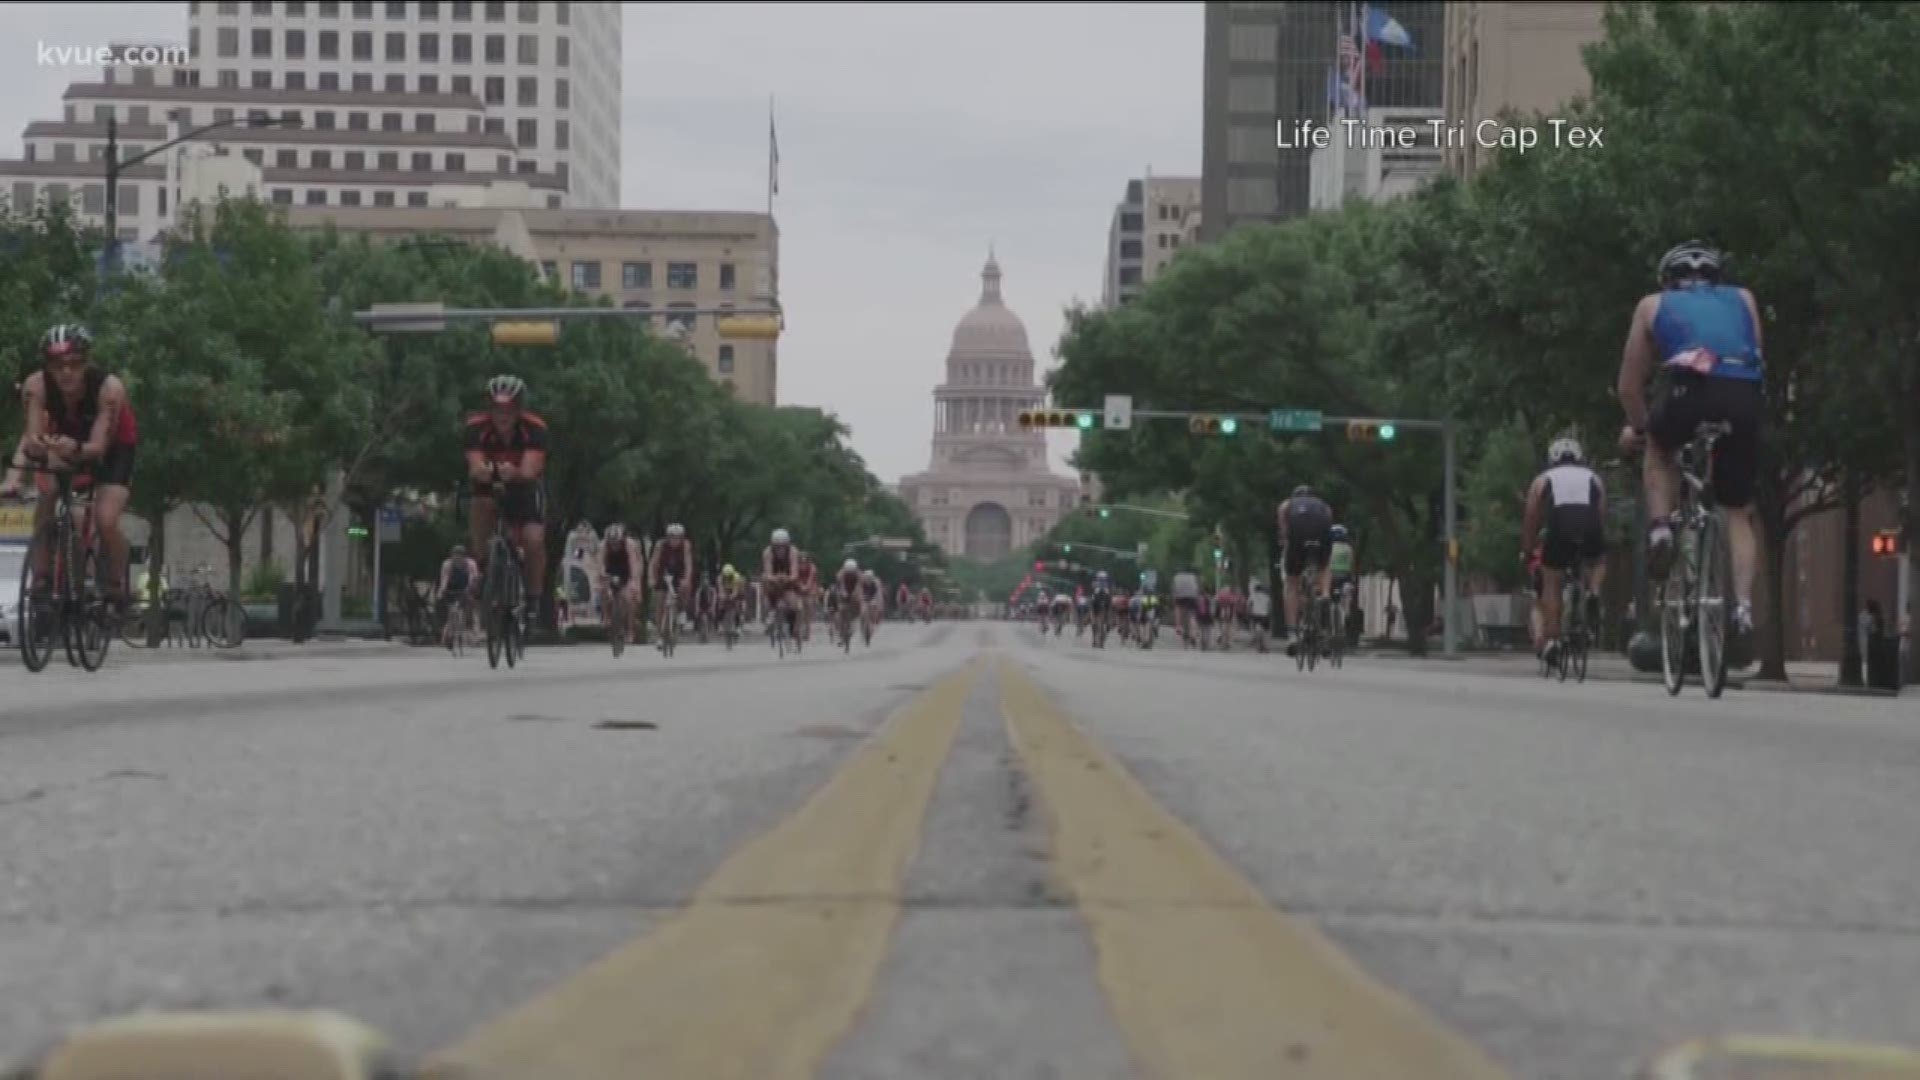 There are 2,000 athletes competing in the 2019 Captex Triathlon at Vic Mathias Shores in Downtown Austin.